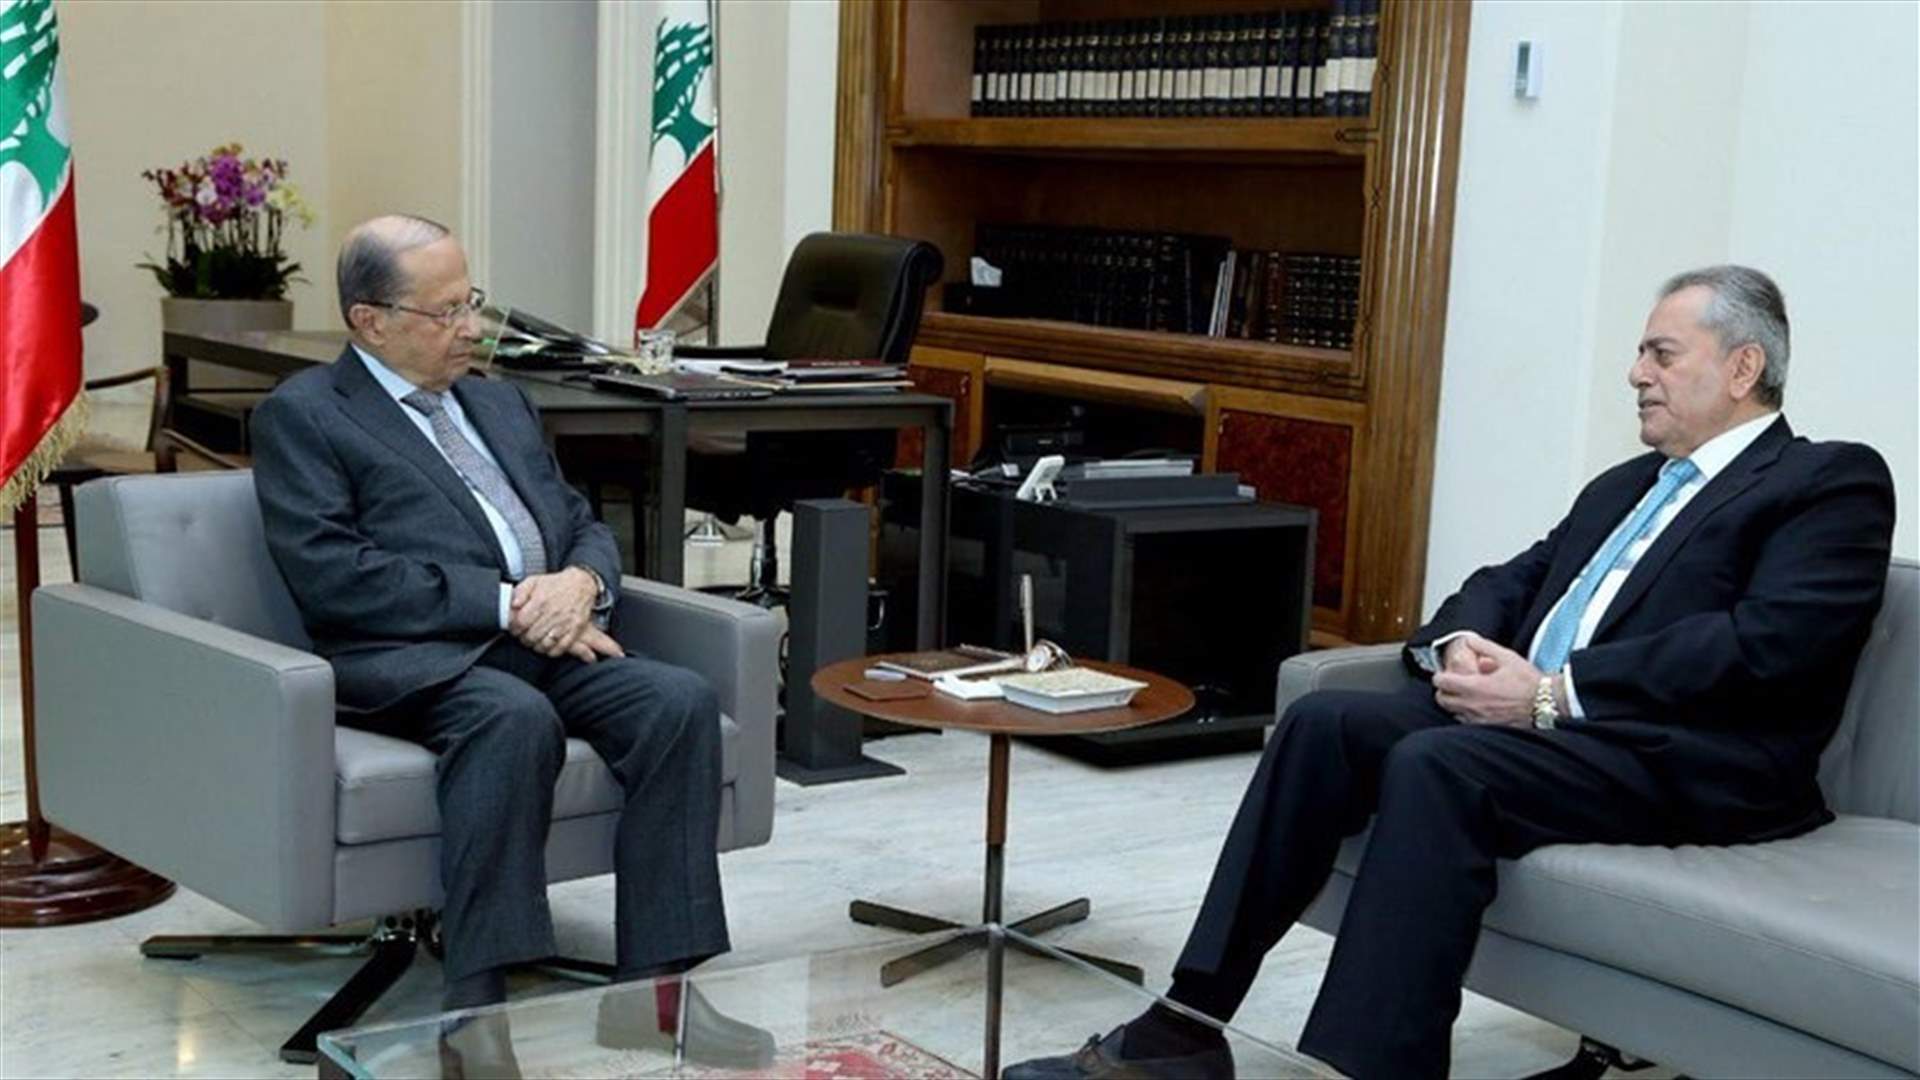 President Aoun discusses issue of refugees with Syrian ambassador